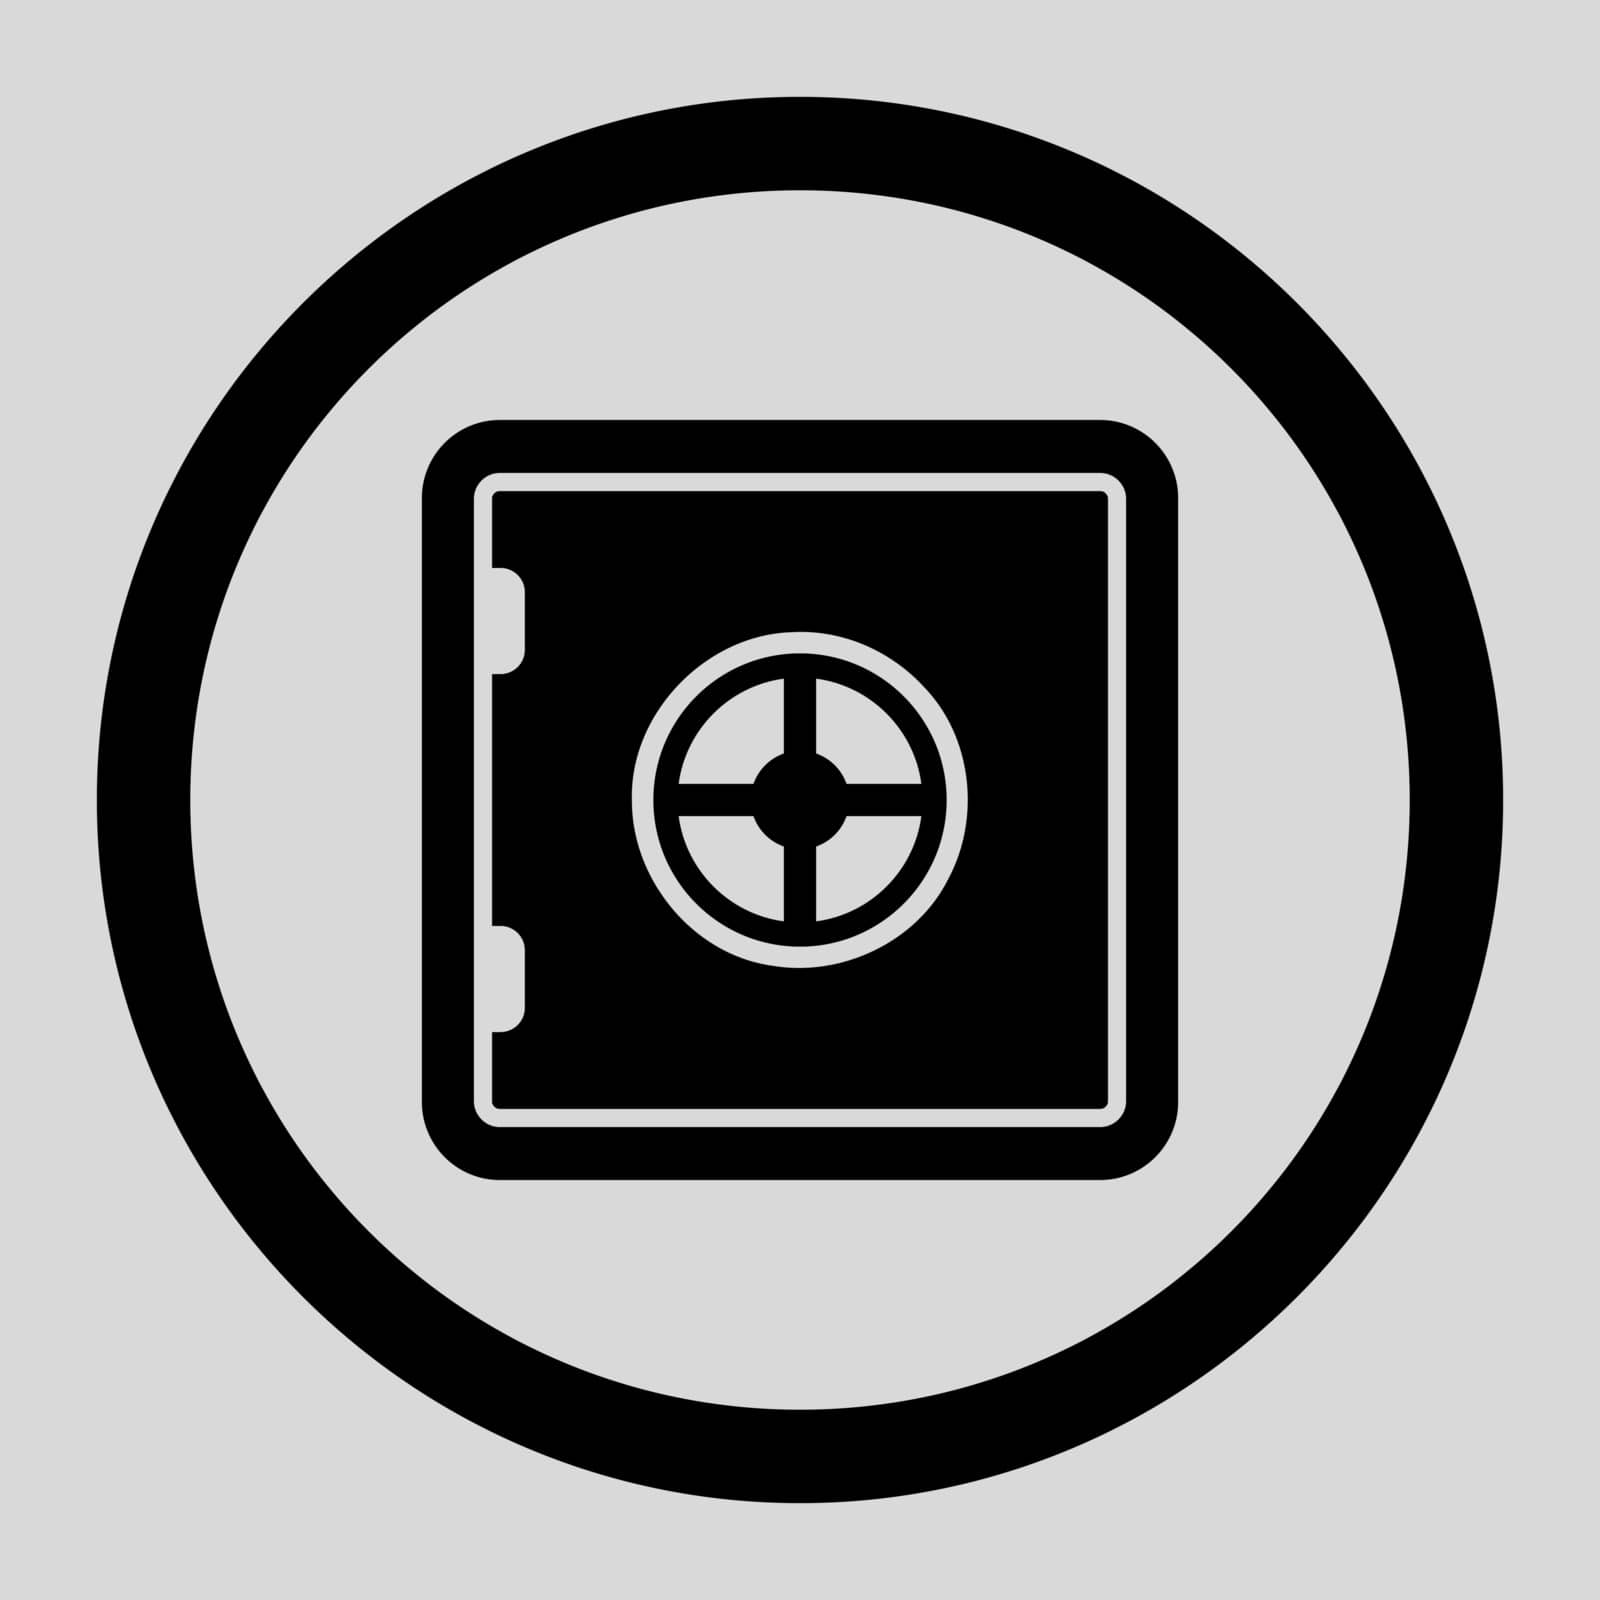 Safe vector icon. This flat rounded symbol uses black color and isolated on a light gray background.